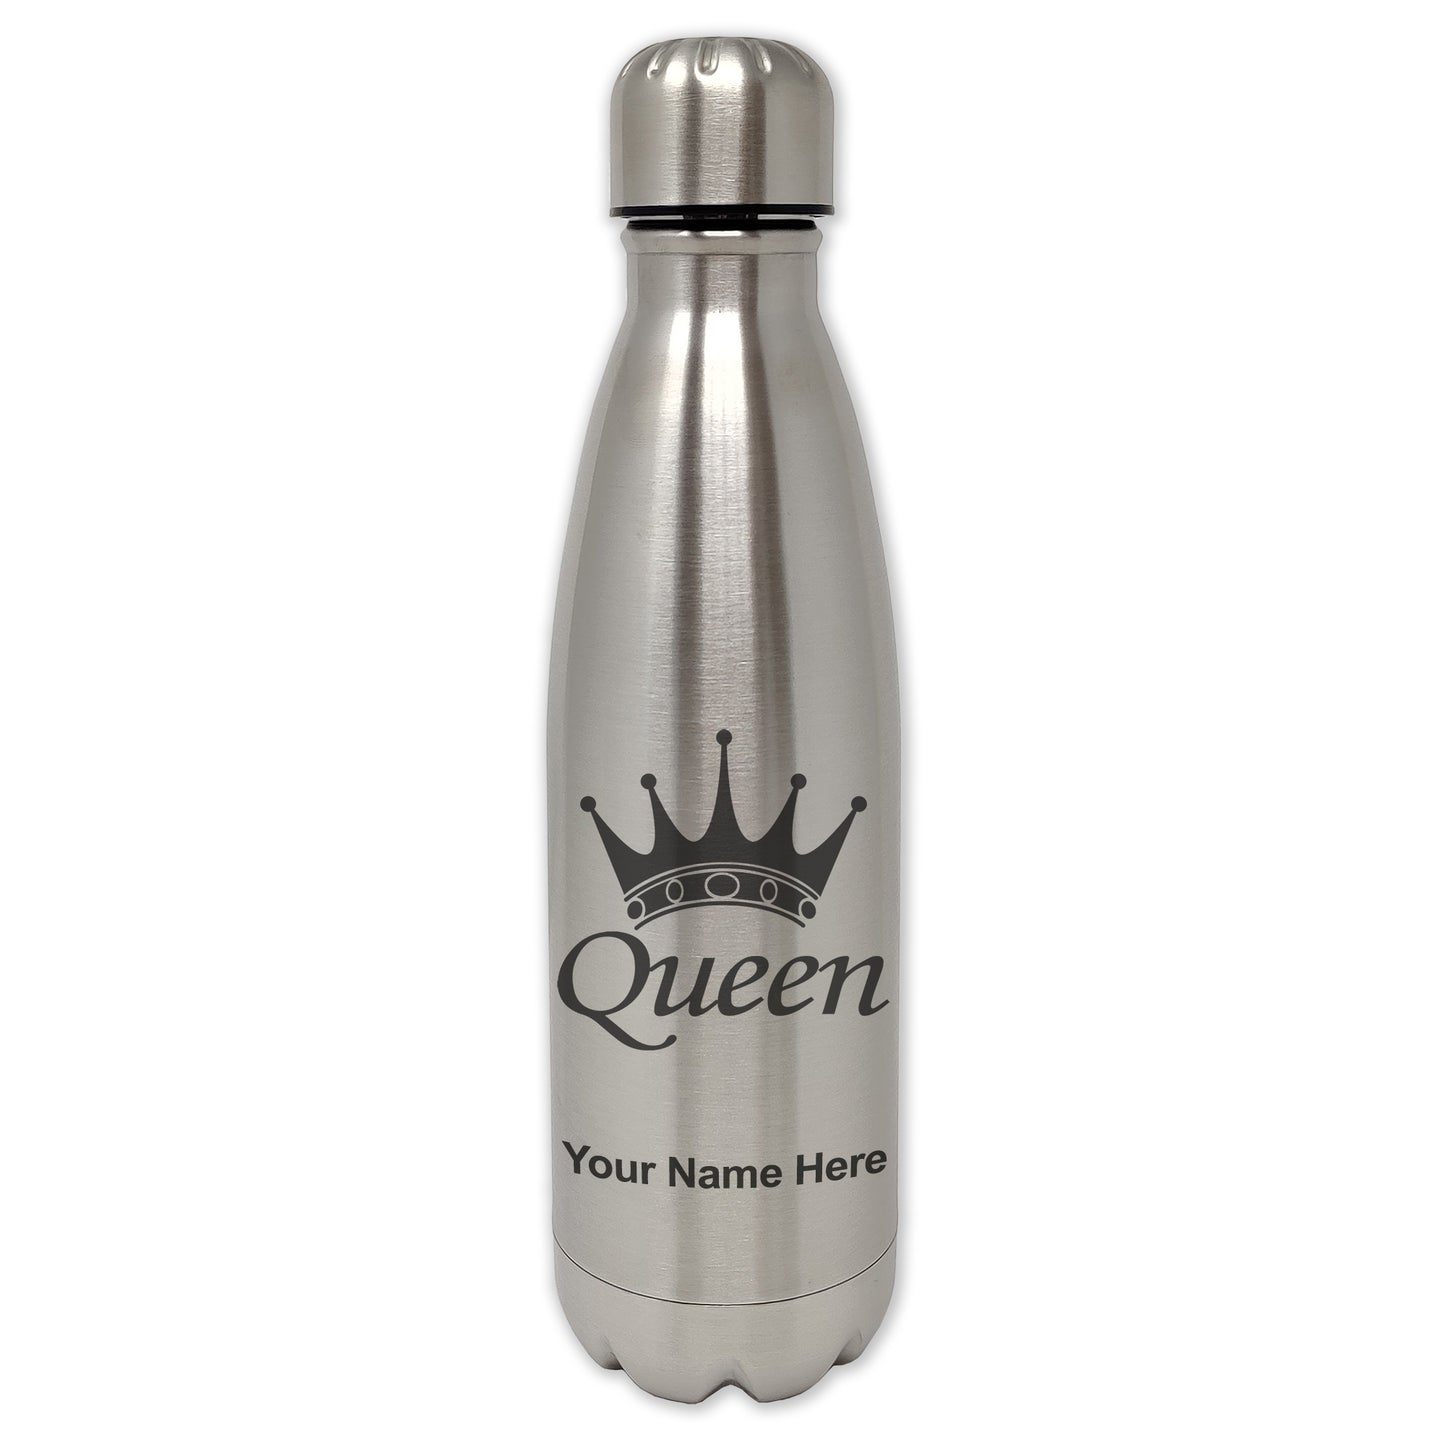 LaserGram Single Wall Water Bottle, Queen Crown, Personalized Engraving Included